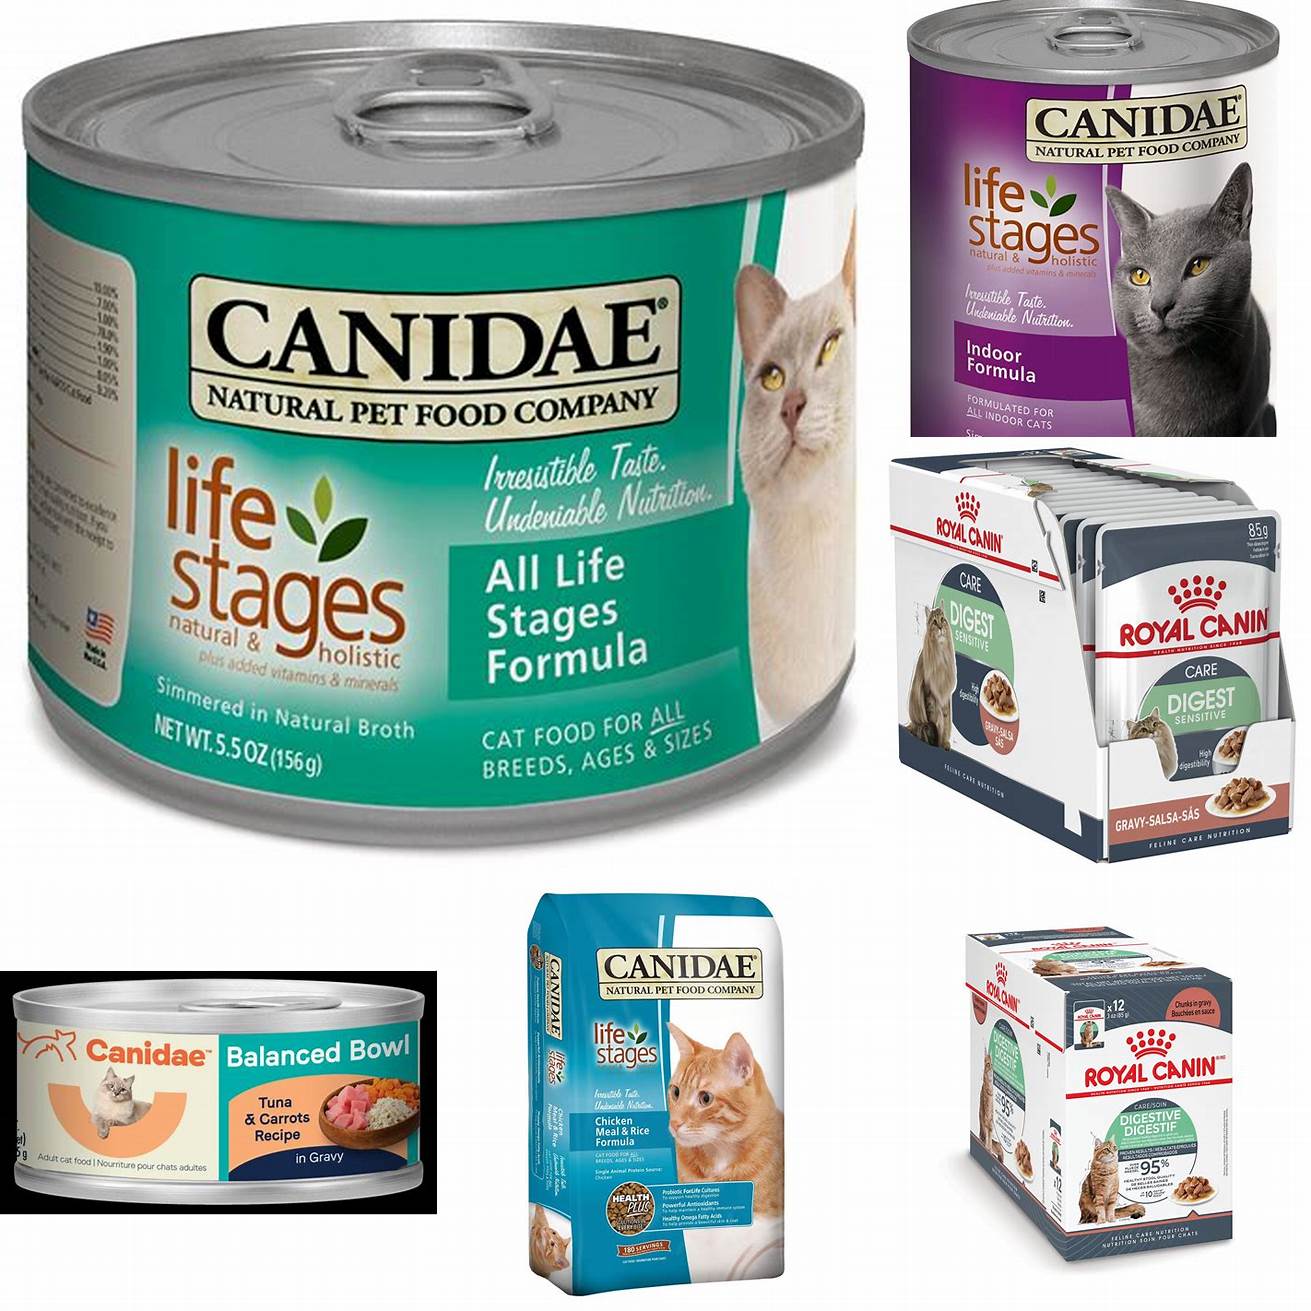 Canidae Wet Cat Food is easy to digest which makes it an ideal choice for cats with digestive issues